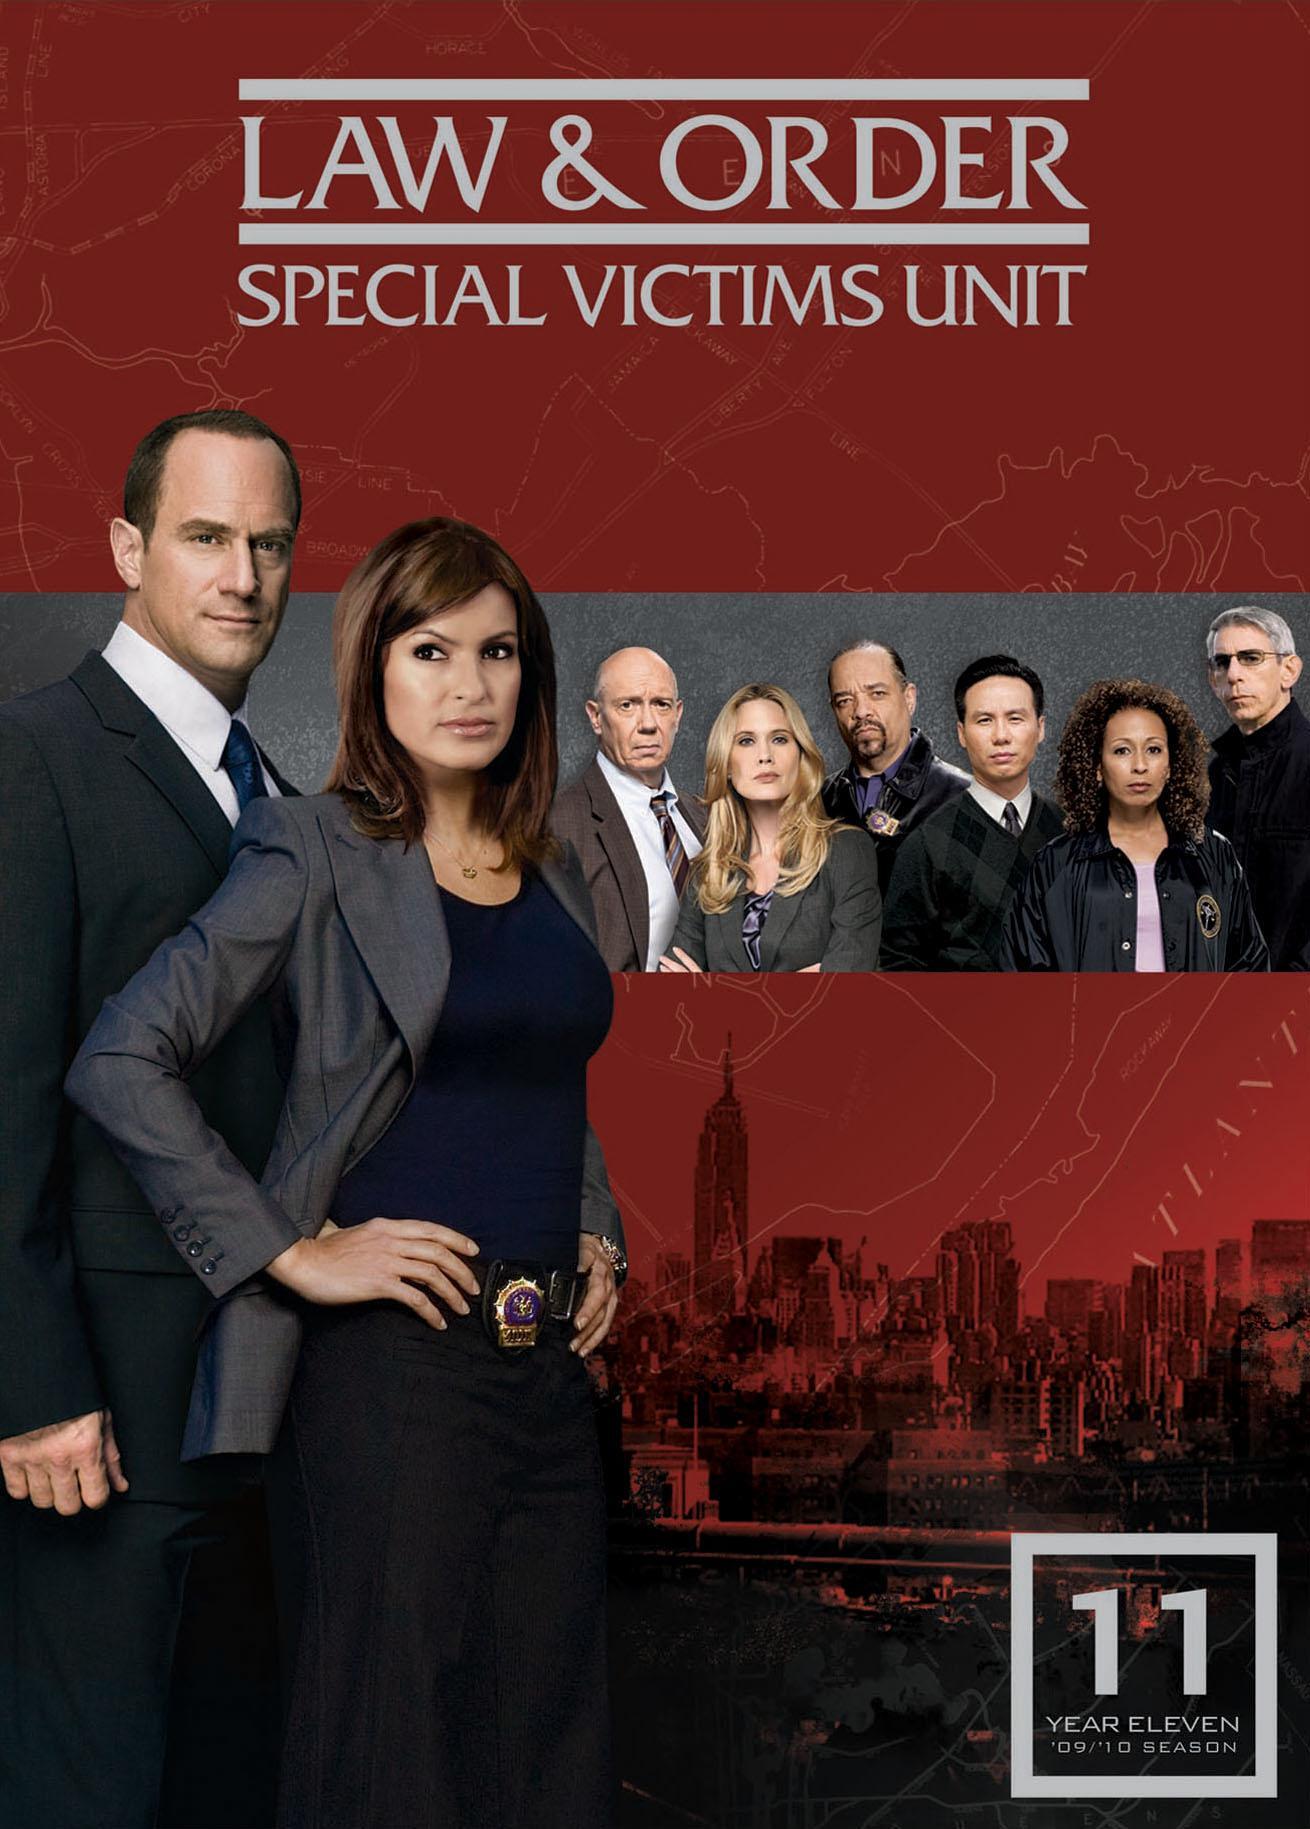 Law And Order - Special Victims Unit: Season 11 - DVD [ 2010 ]  - Drama Television On DVD - TV Shows On GRUV